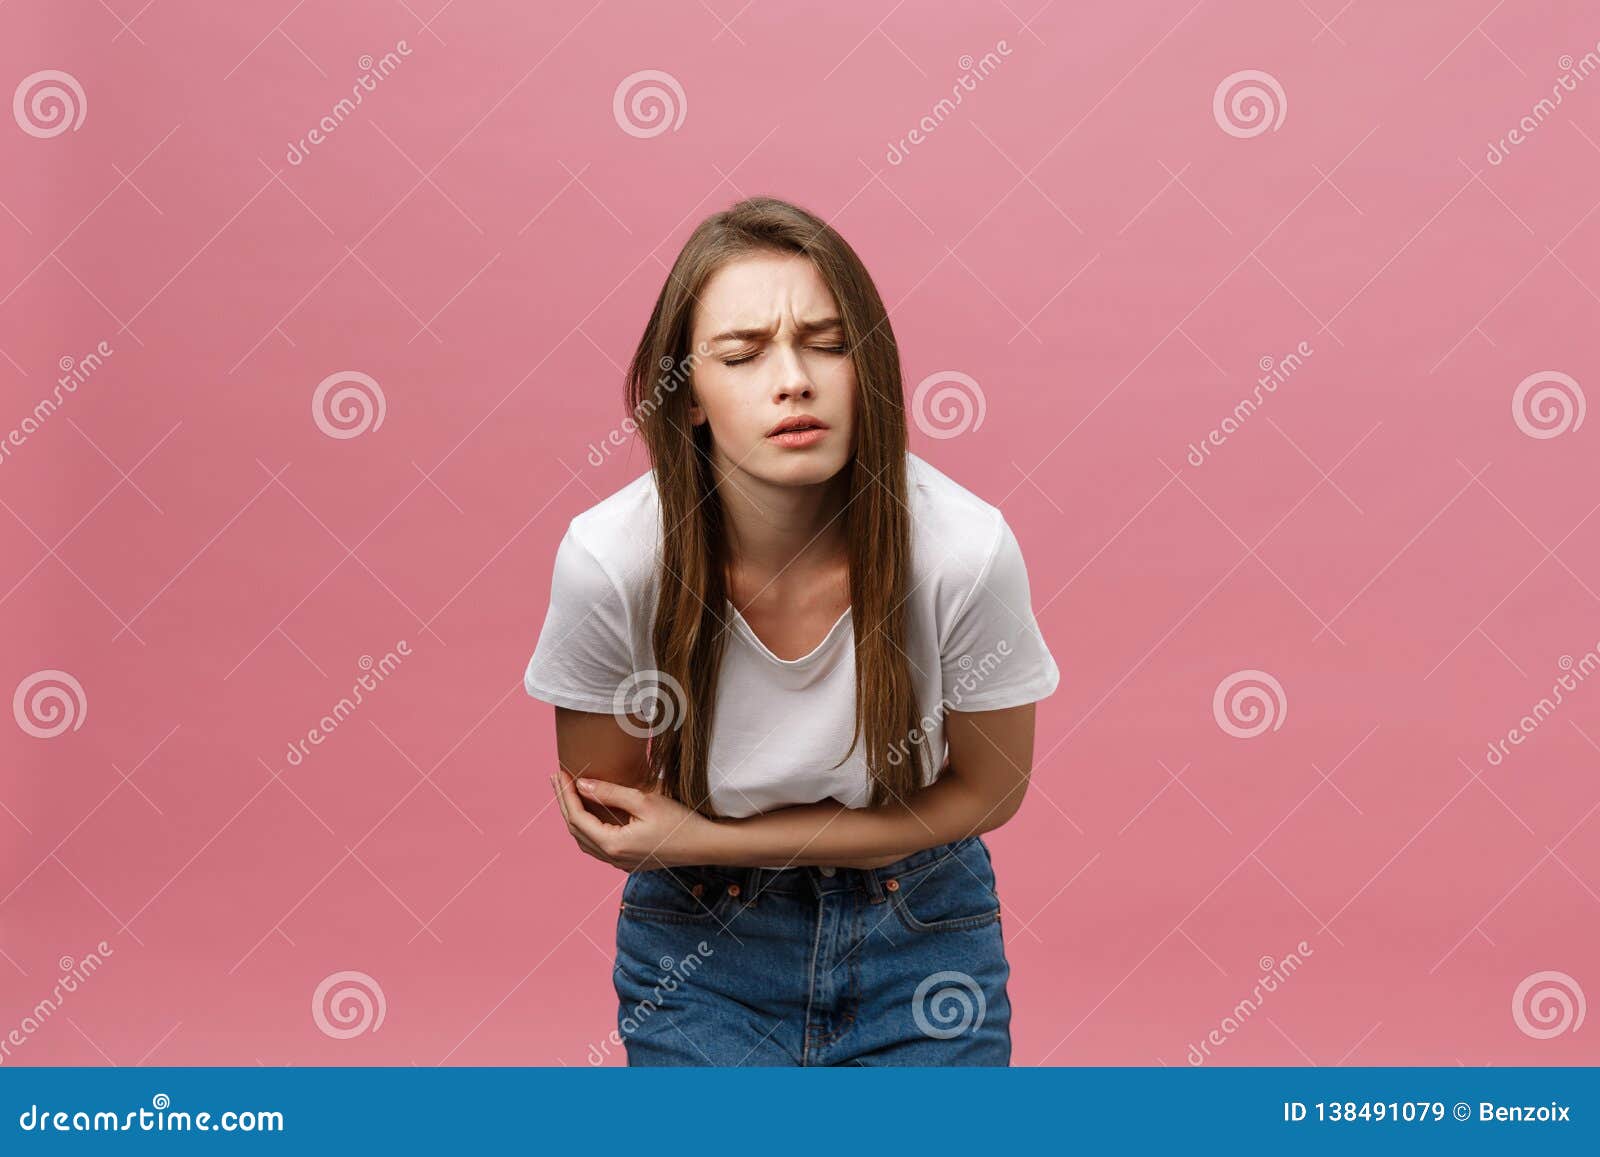 young caucasian woman over  background with hand on stomach because indigestion, painful illness feeling unwell